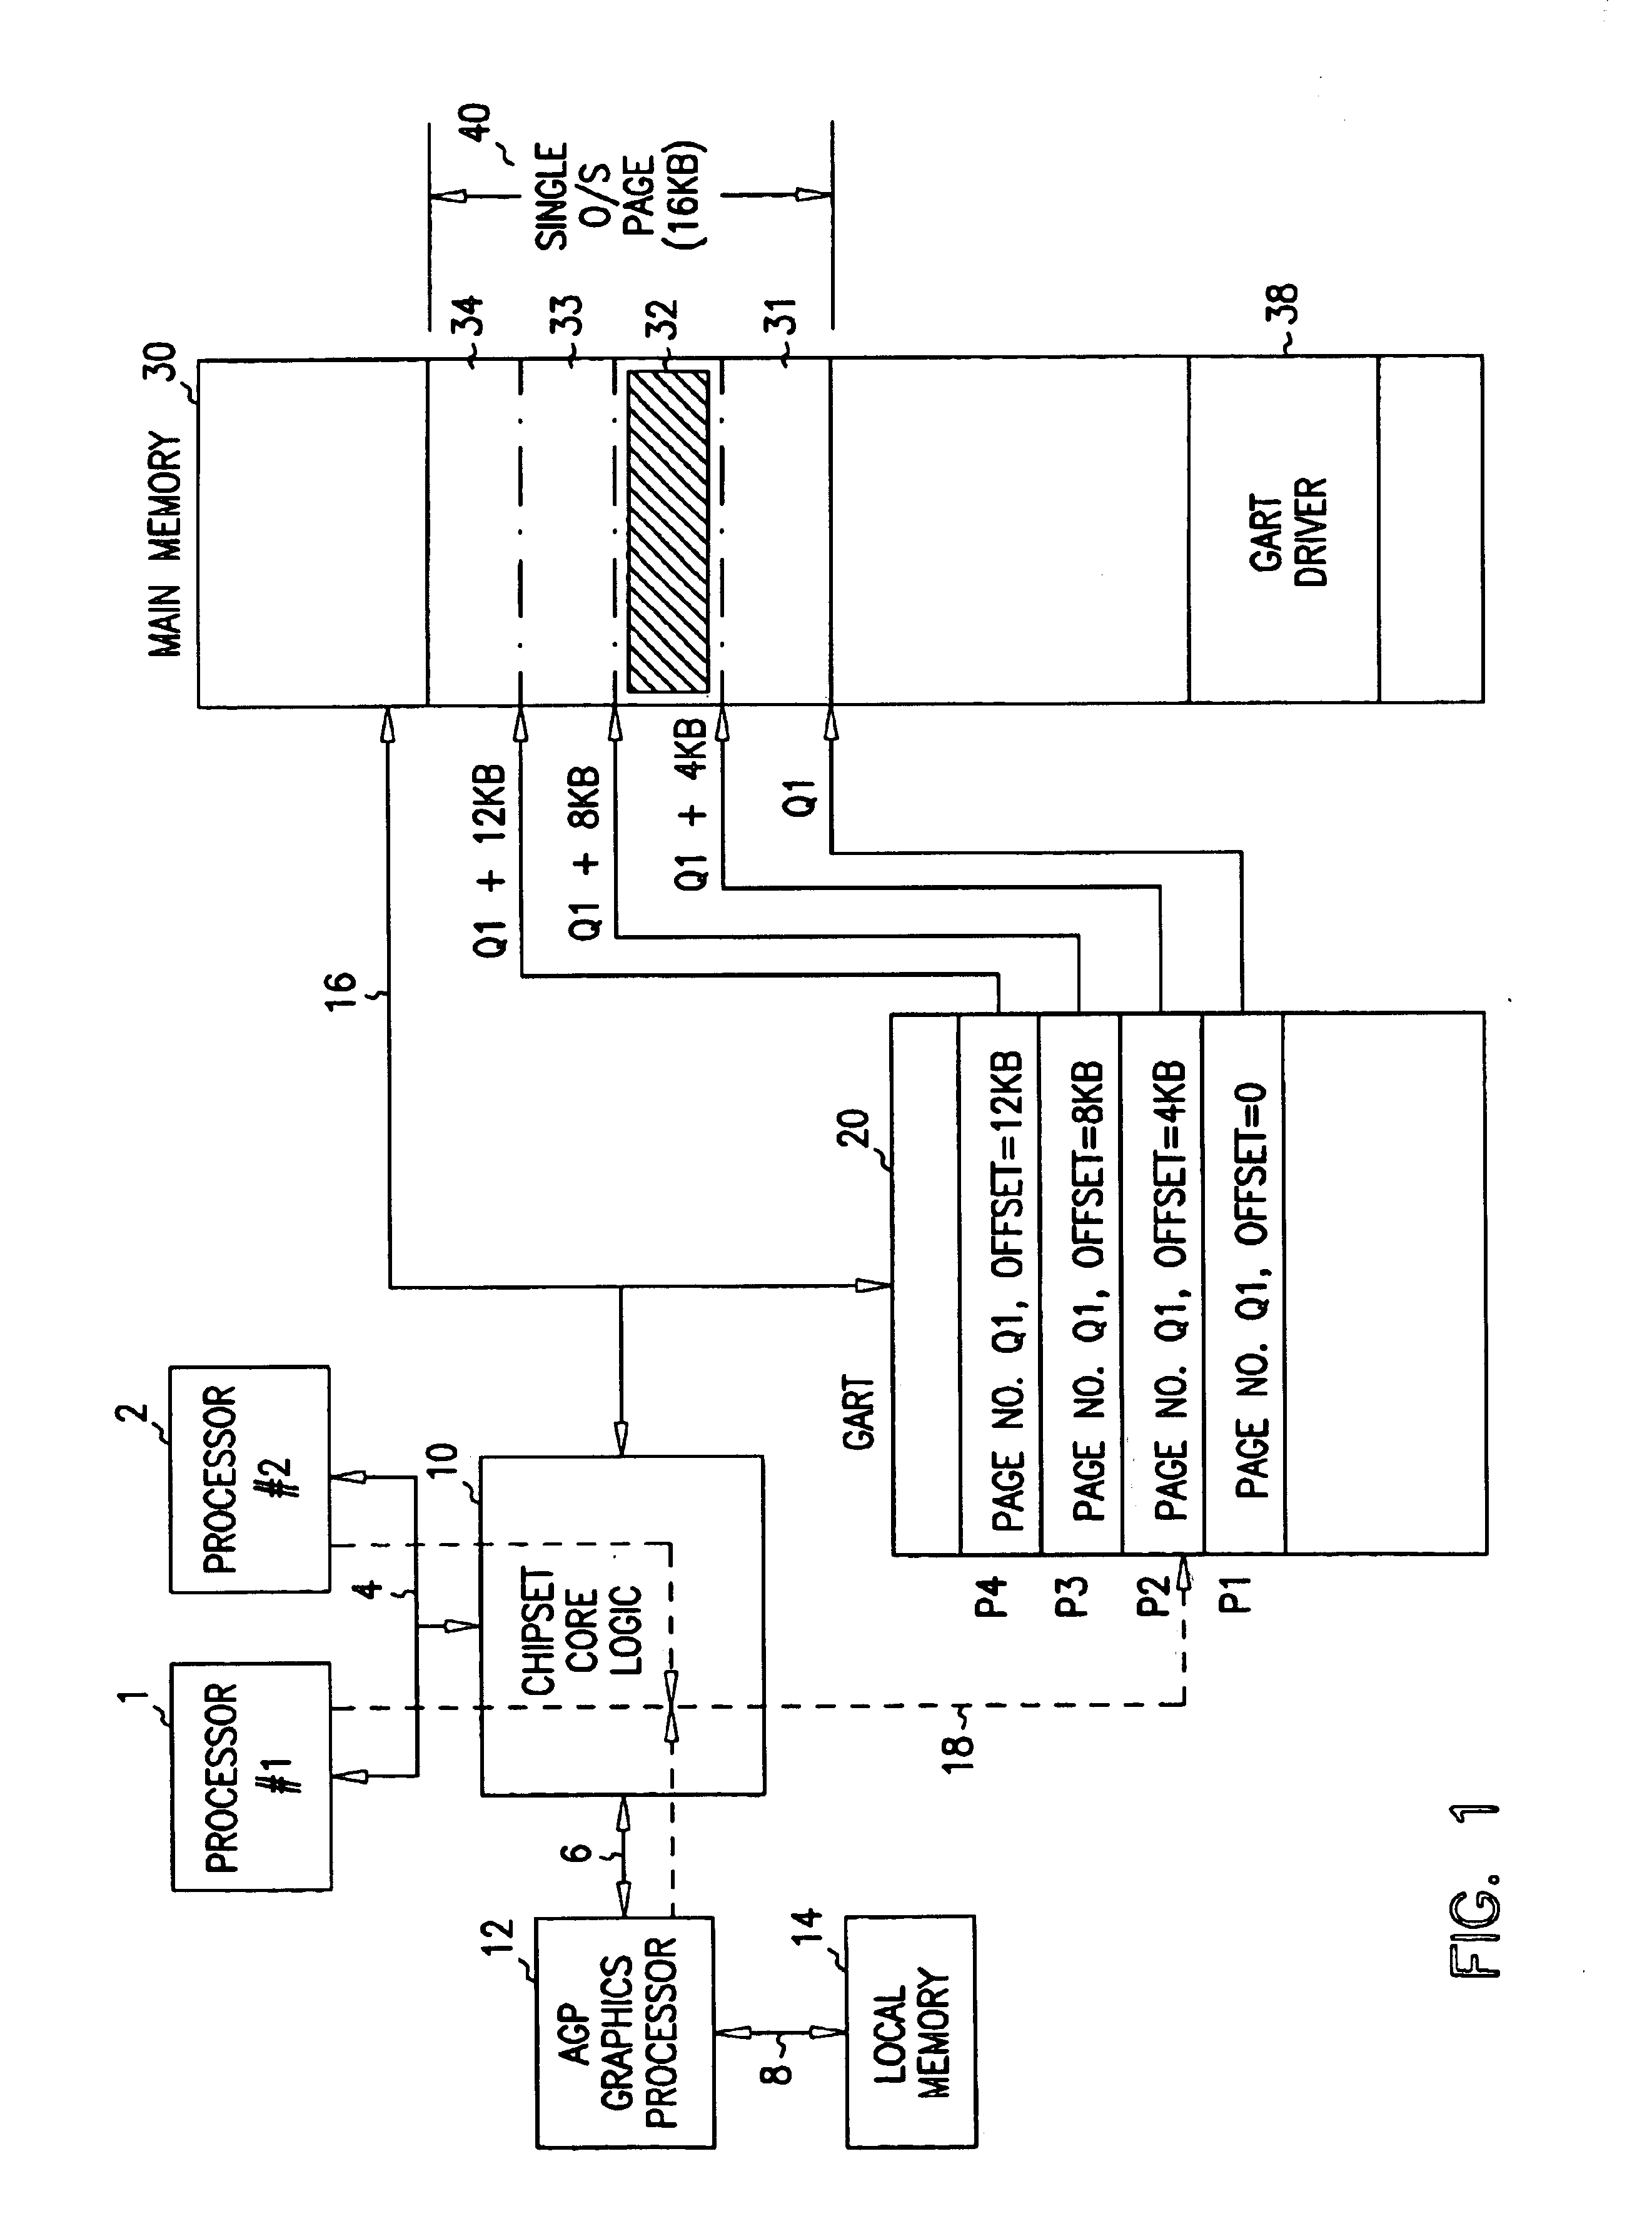 Apparatus to map virtual pages to disparate-sized, non-contiguous real pages and methods relating thereto